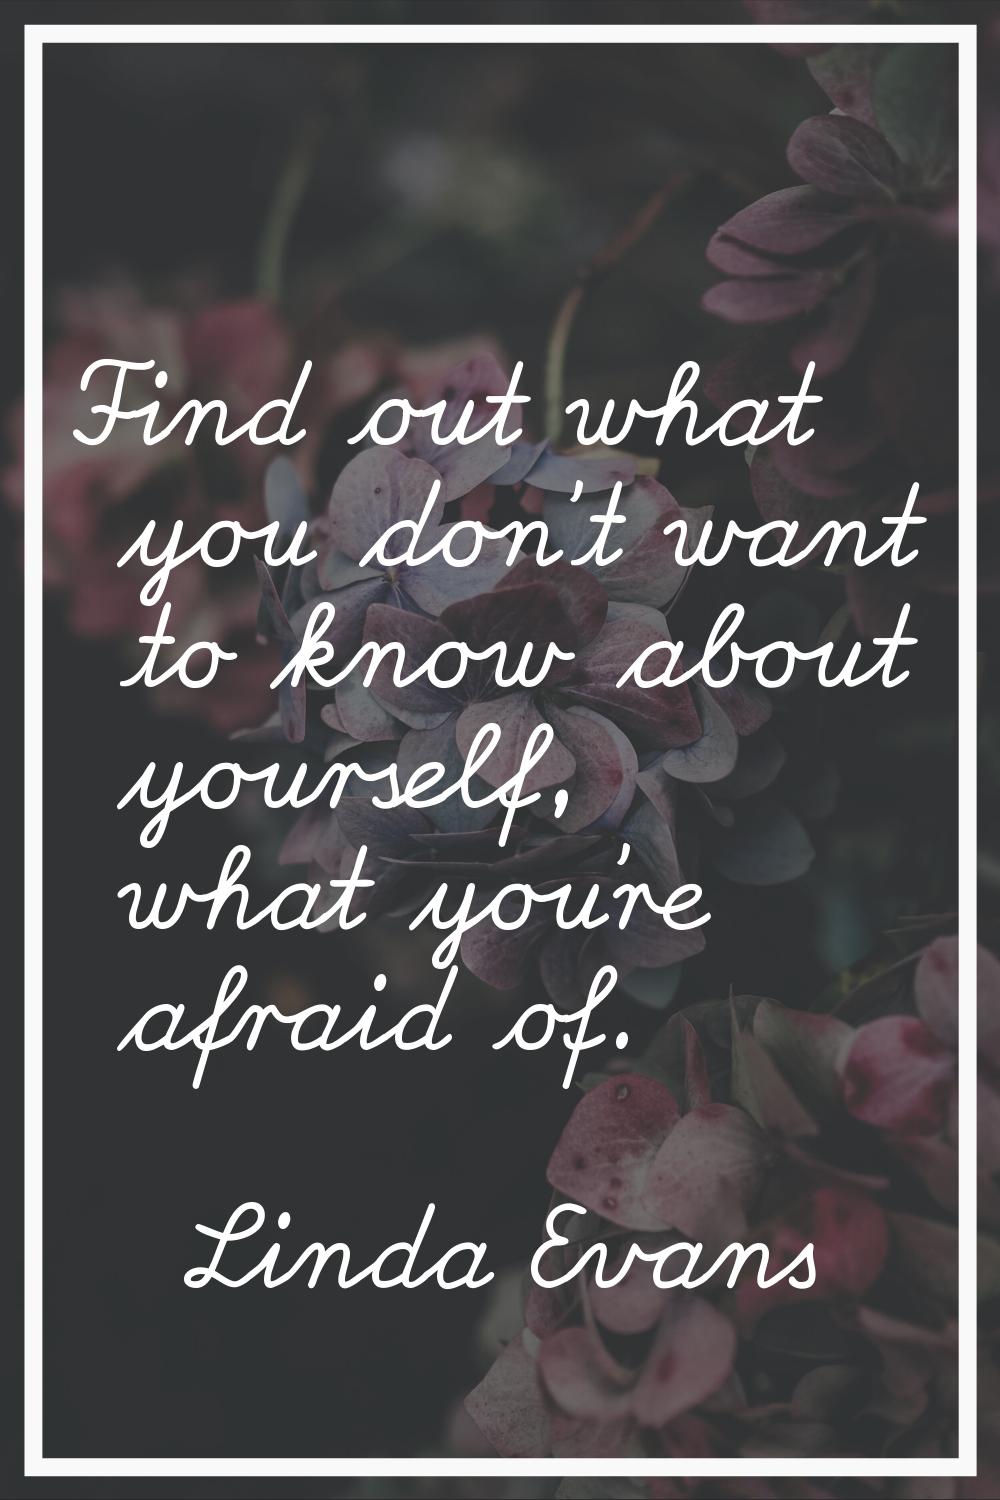 Find out what you don't want to know about yourself, what you're afraid of.